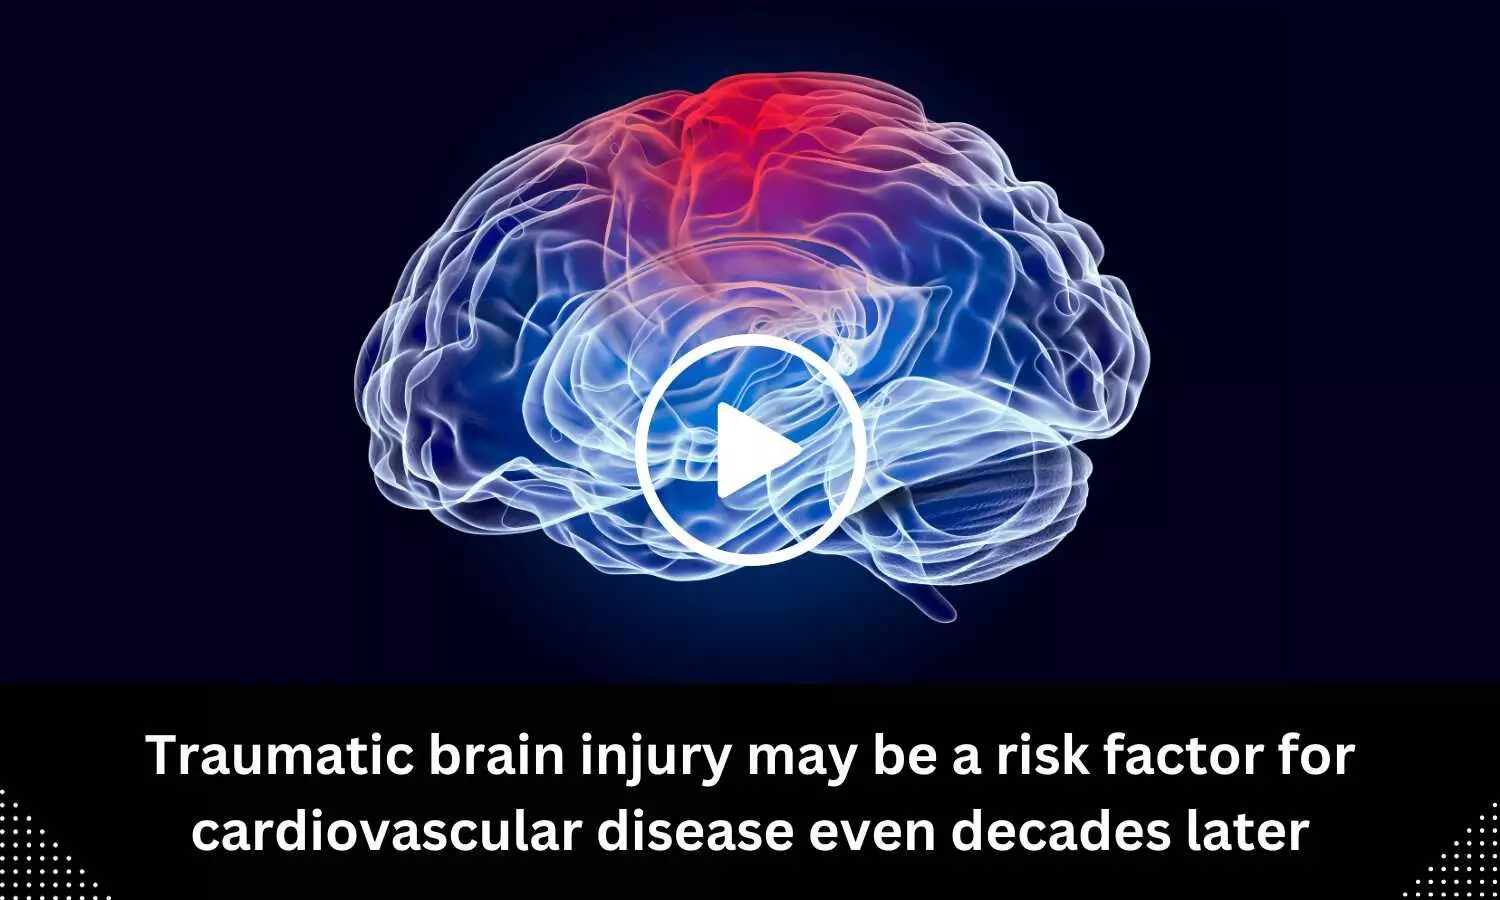 Traumatic brain injury may be a risk factor for cardiovascular disease even decades later